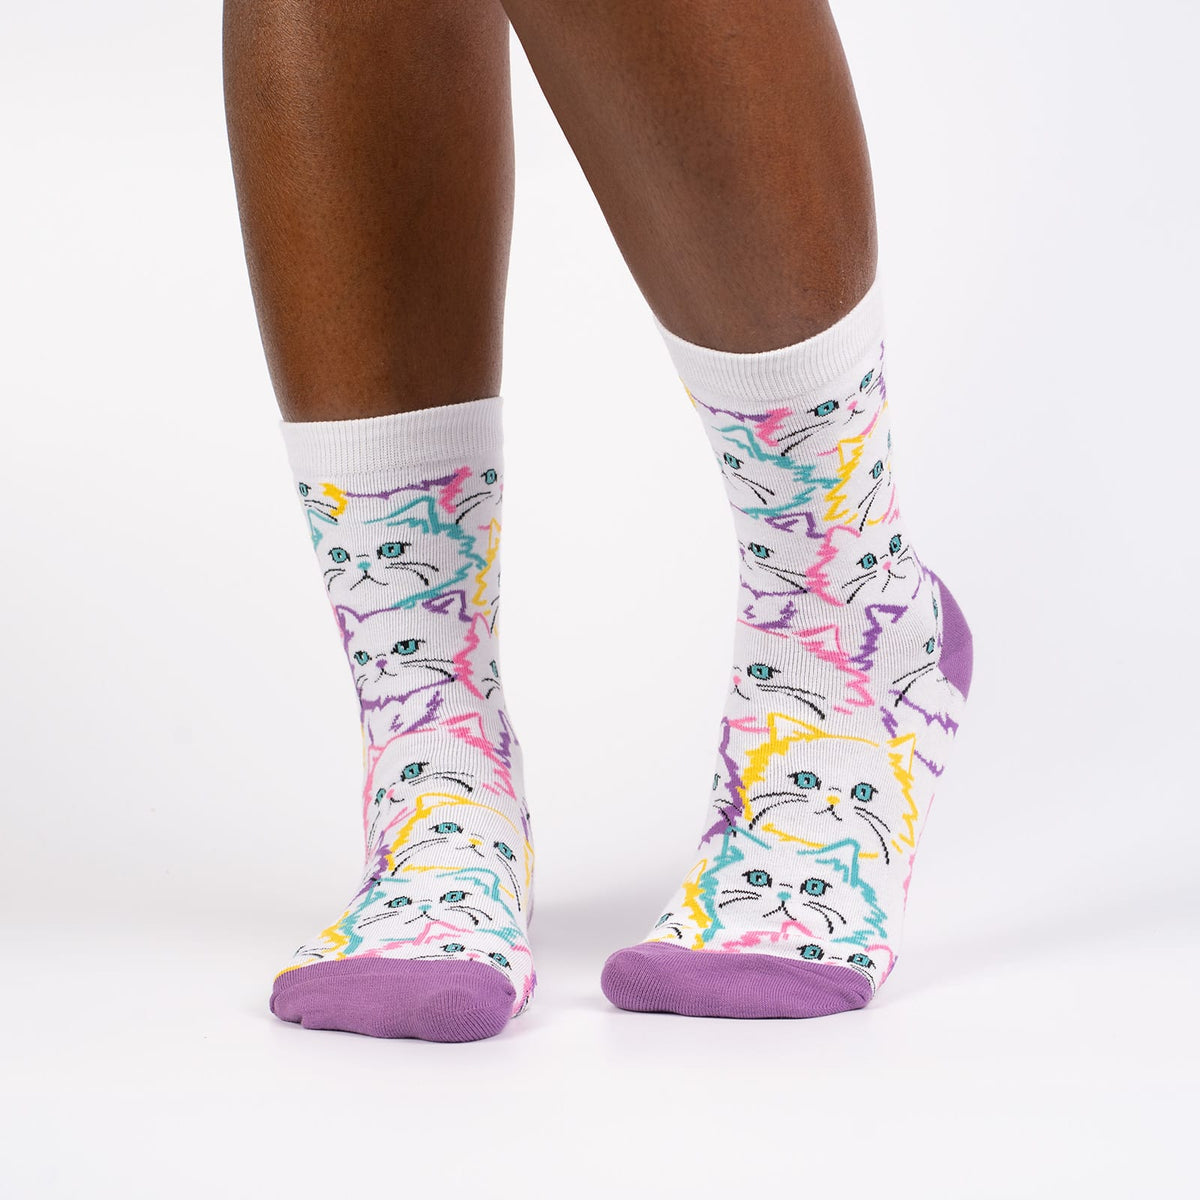 Sock It To Me Fur Real women&#39;s crew sock featuring white sock with lavender heel and toe with white cats outlined in pastel colors. Socks worn by model seen from front. 